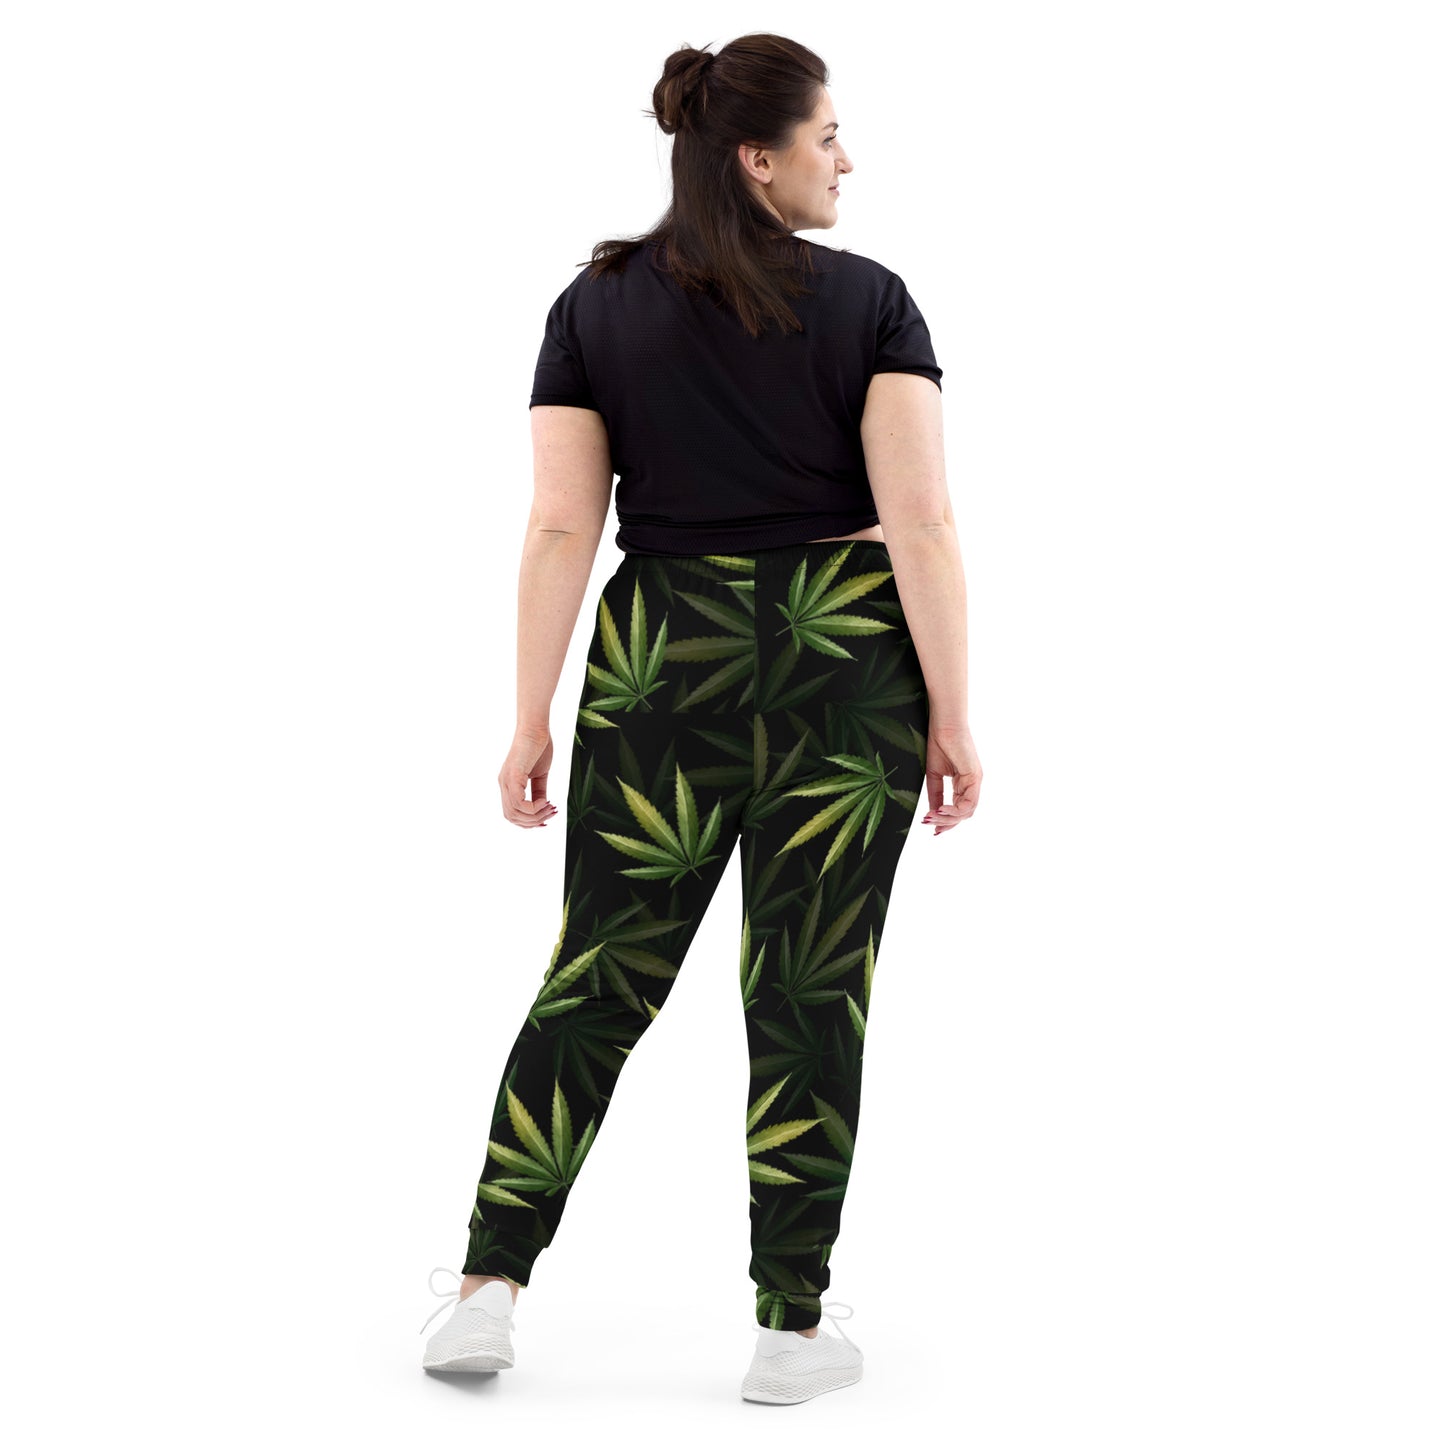 Real Cannabis Leaf Women's Joggers